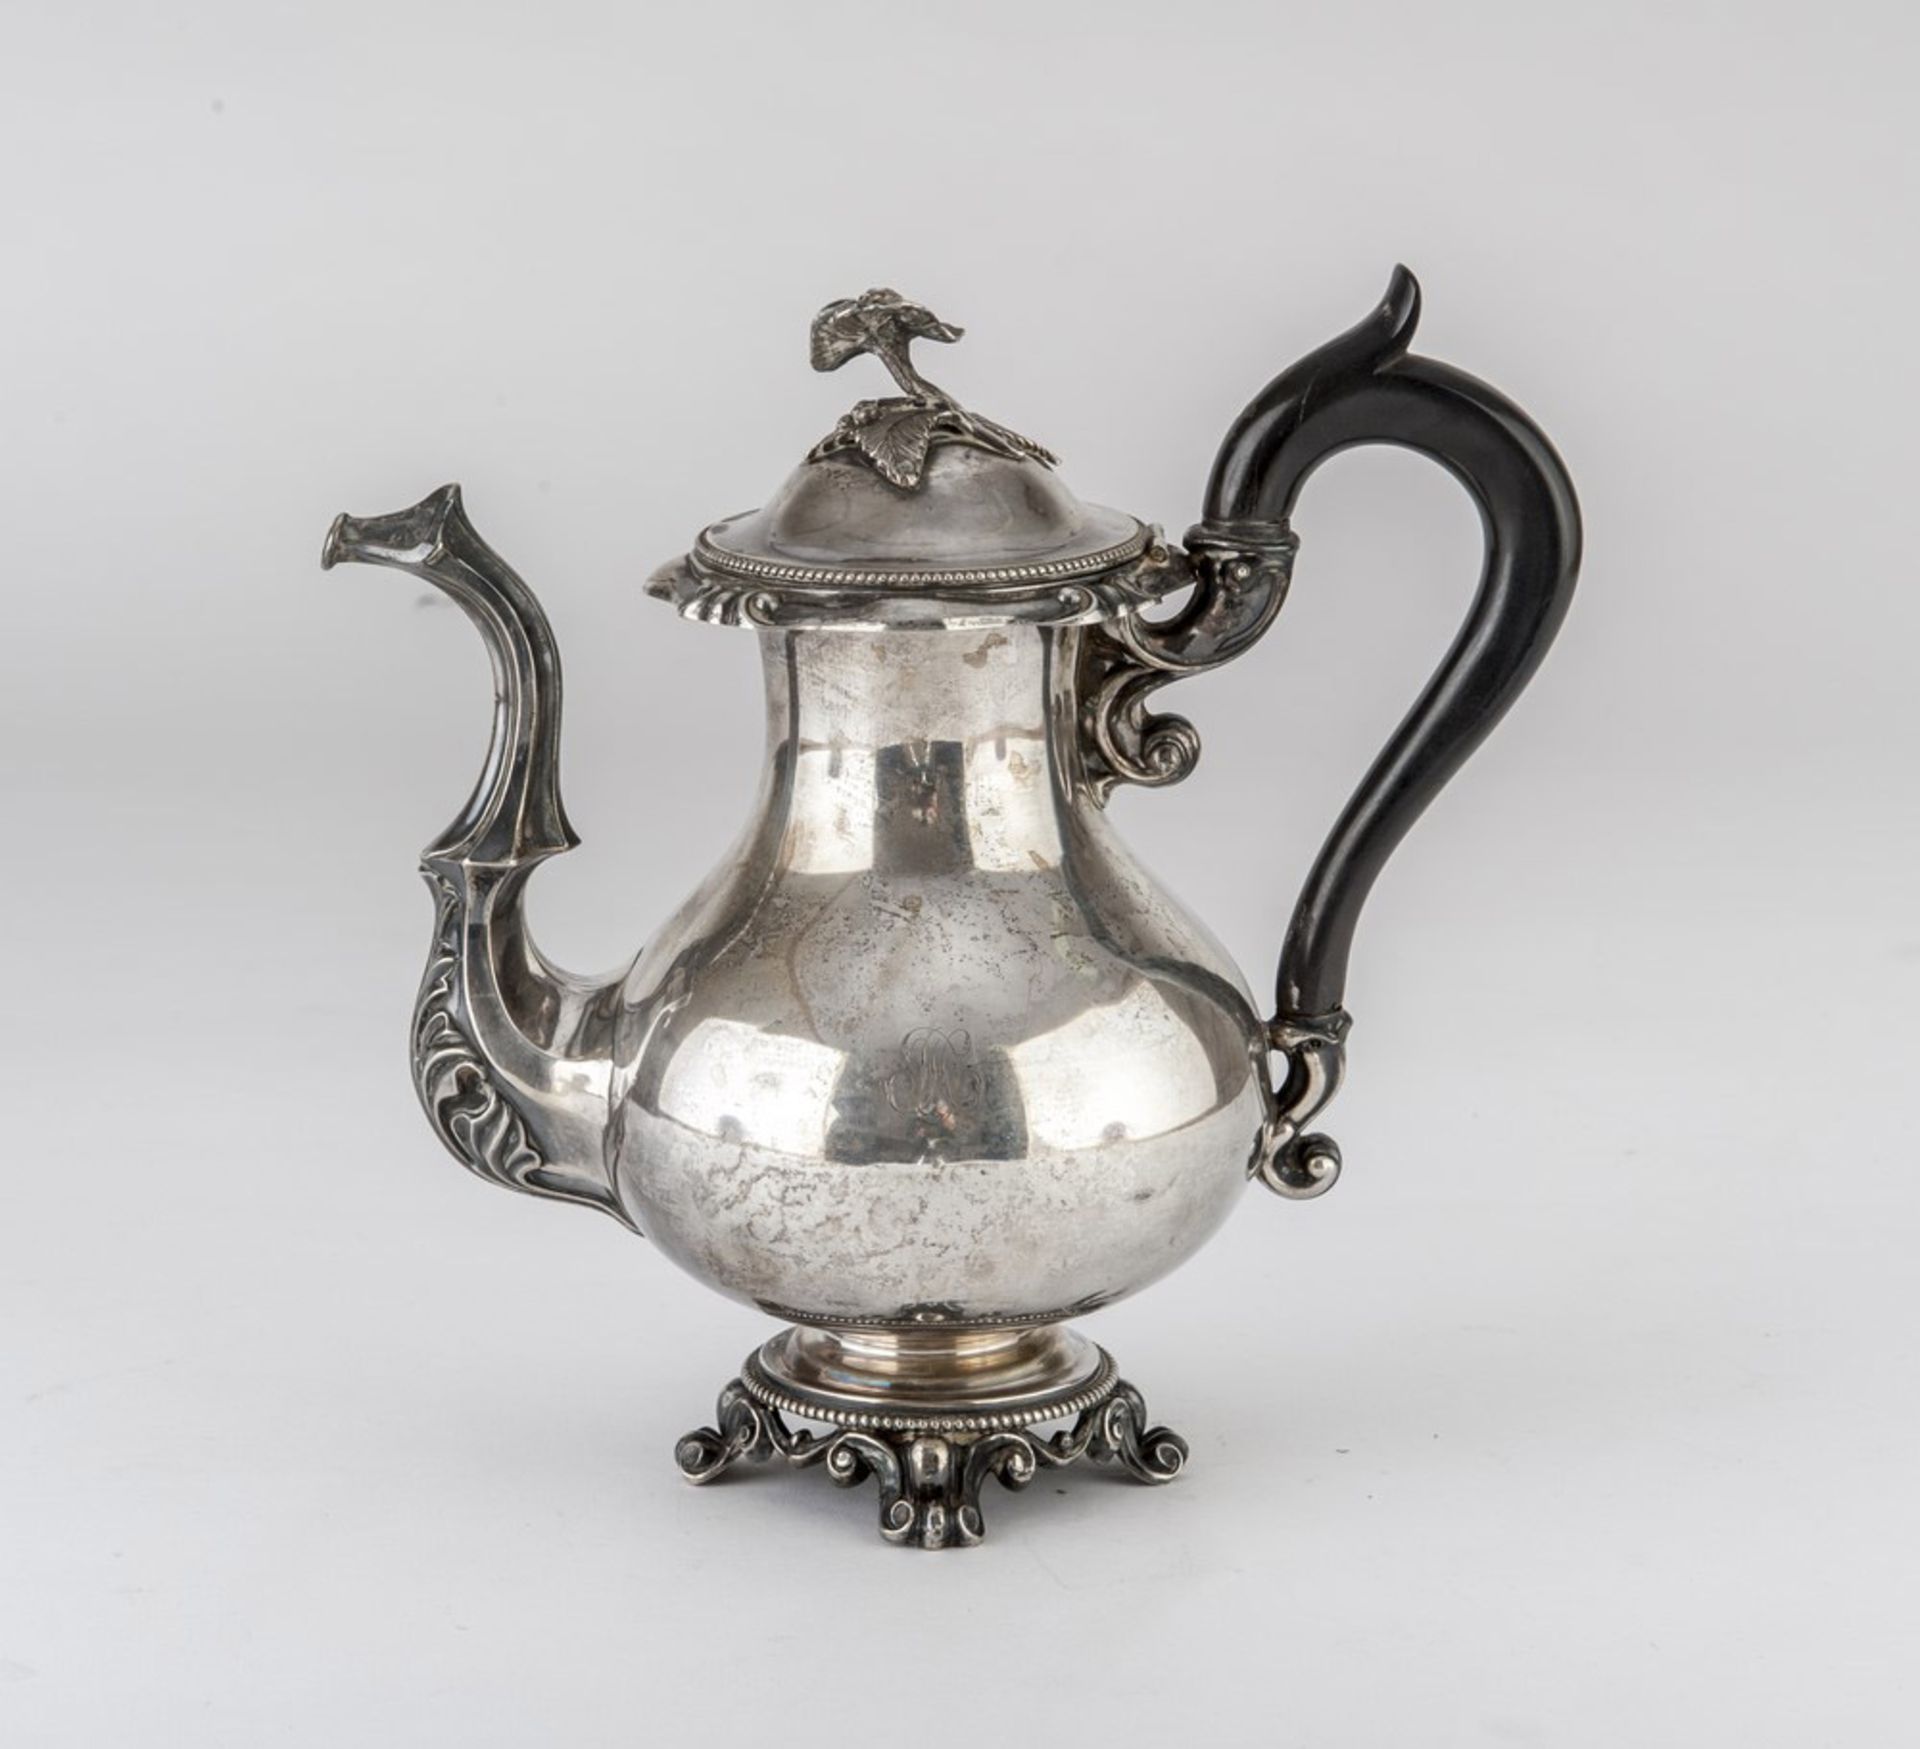 SILVER TEAPOT, PUNCH PARIS 1849/1861 wood handl. Silversmith Martial Fray. Title 950/1000.